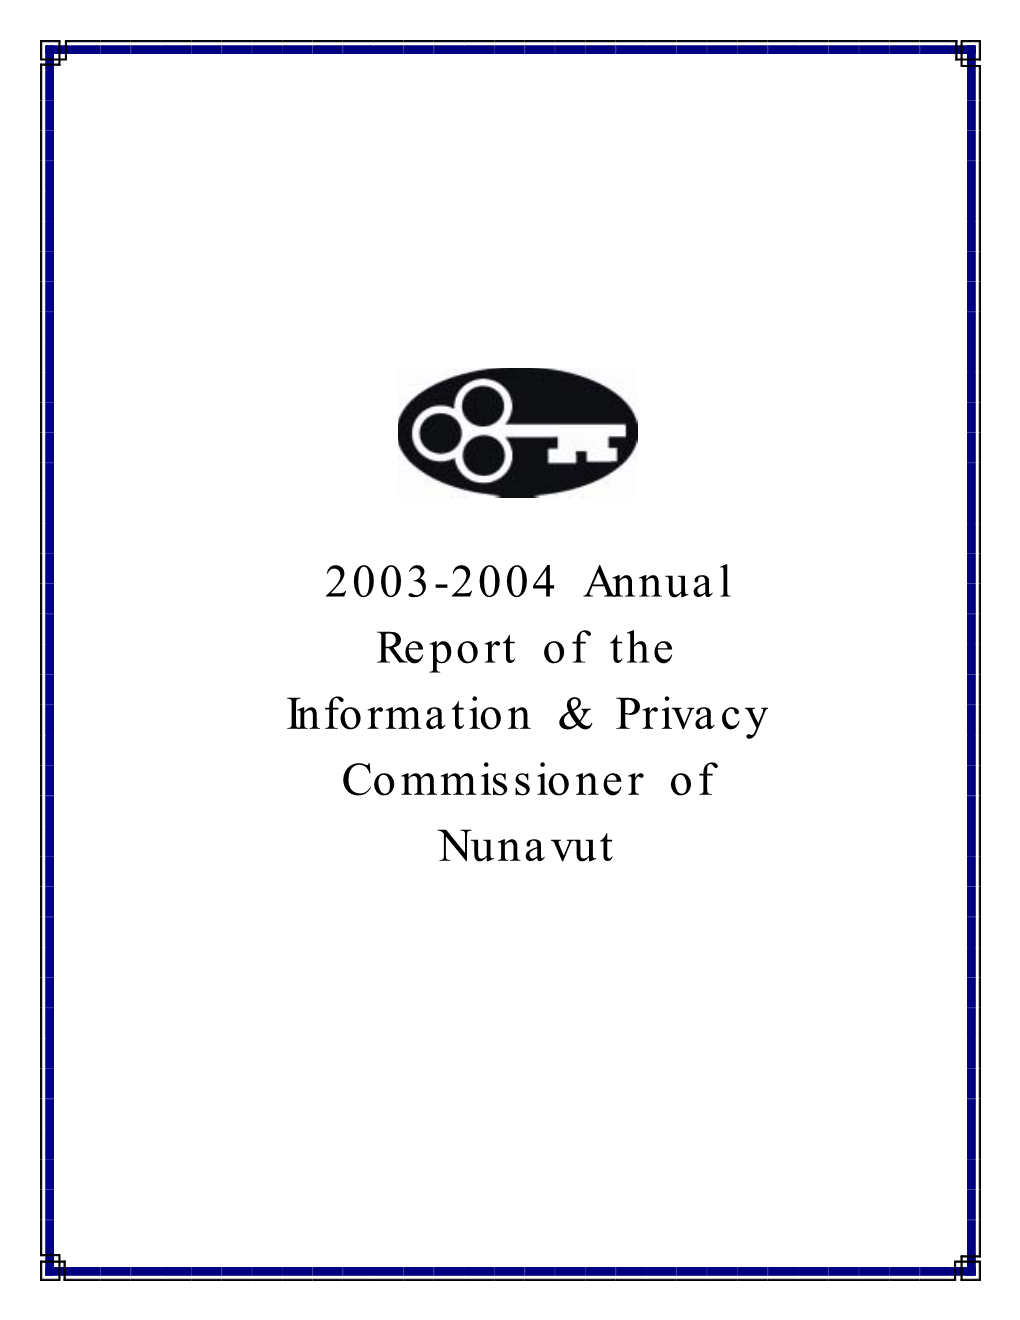 2003-2004 Annual Report of the Information & Privacy